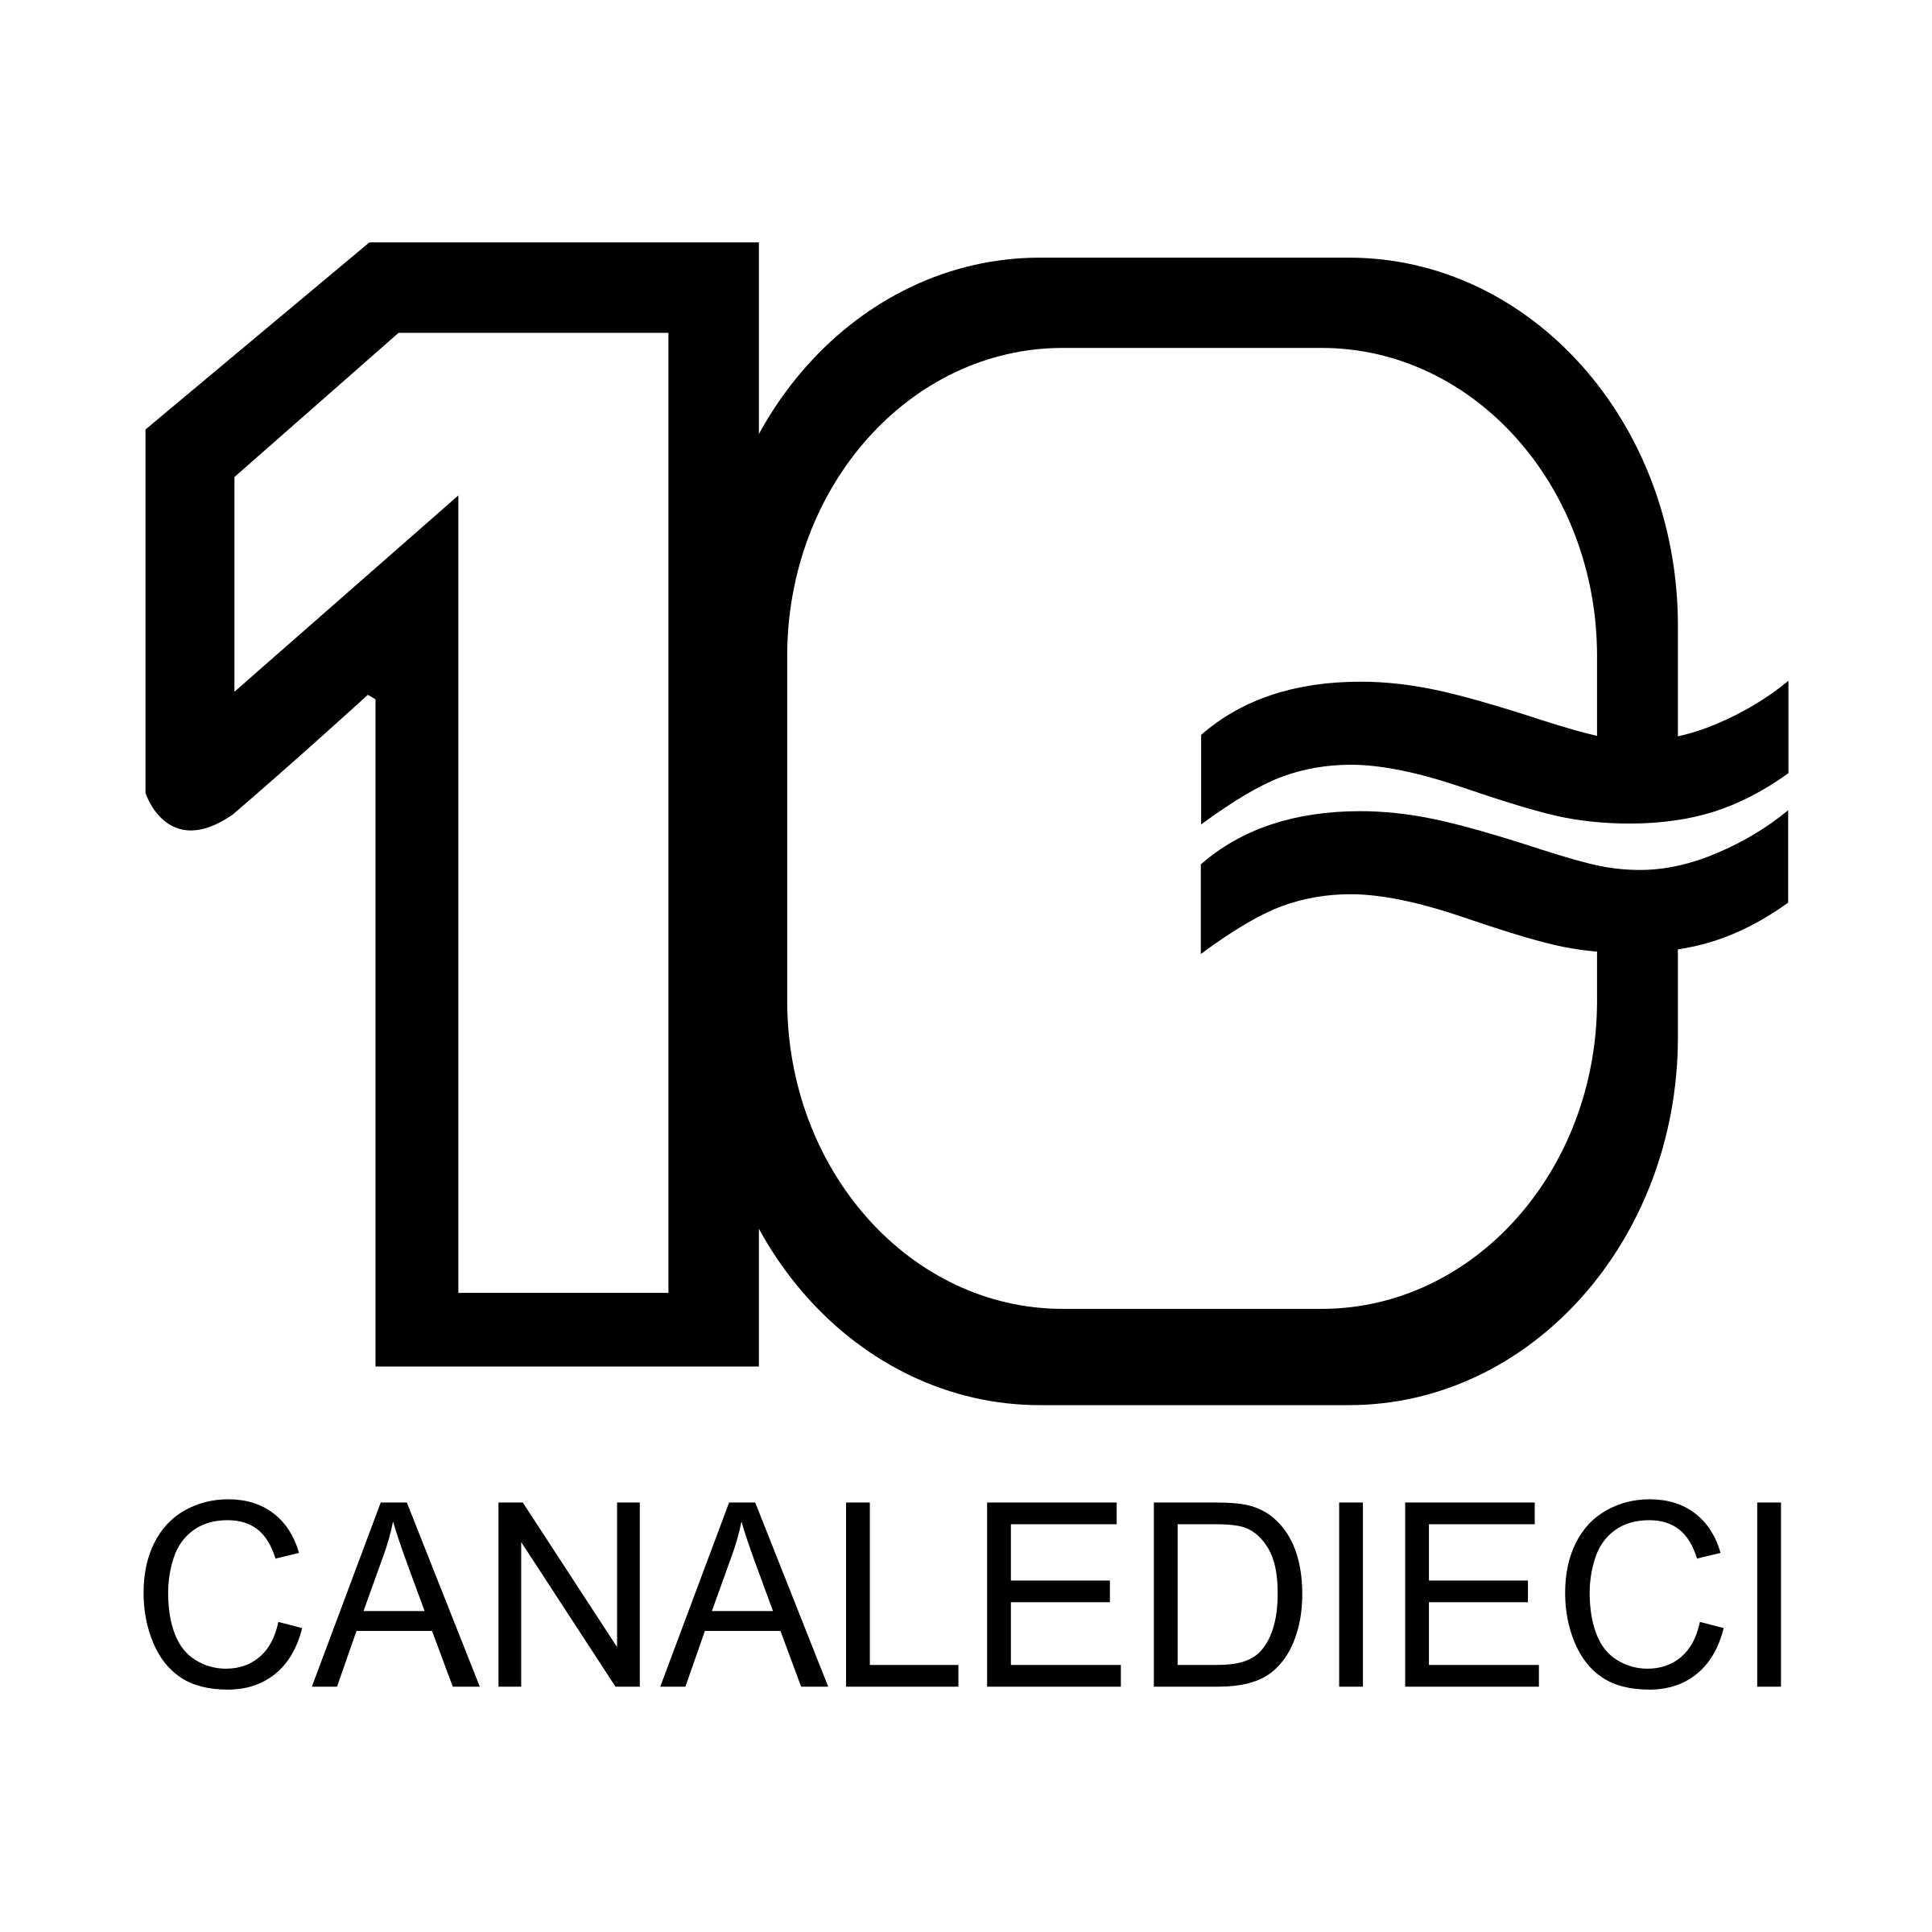 Canali Logo - Canale Dieci Logo PNG Transparent & SVG Vector